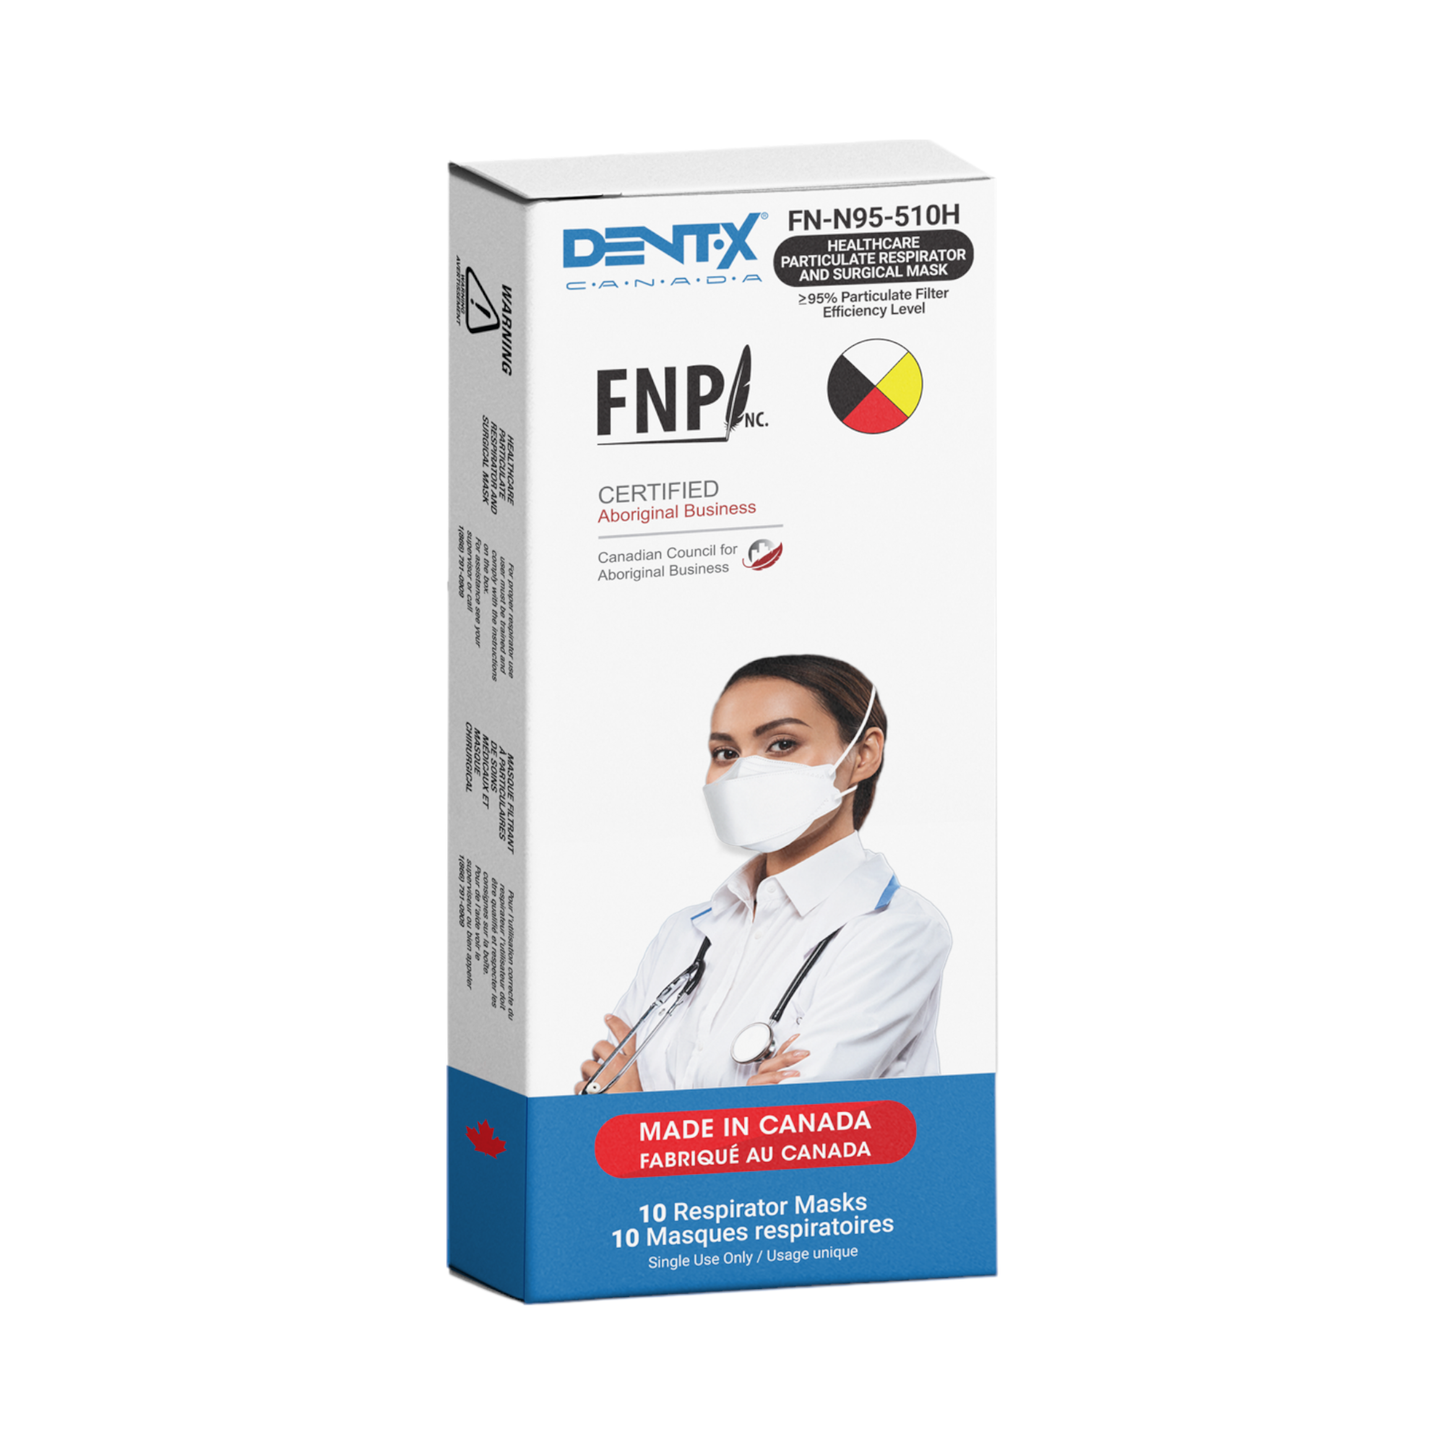 White N95 Mask with Headstraps - Size Medium (Dent-X Canada FN-N95-510H Model - Box of 10 Disposable Masks)